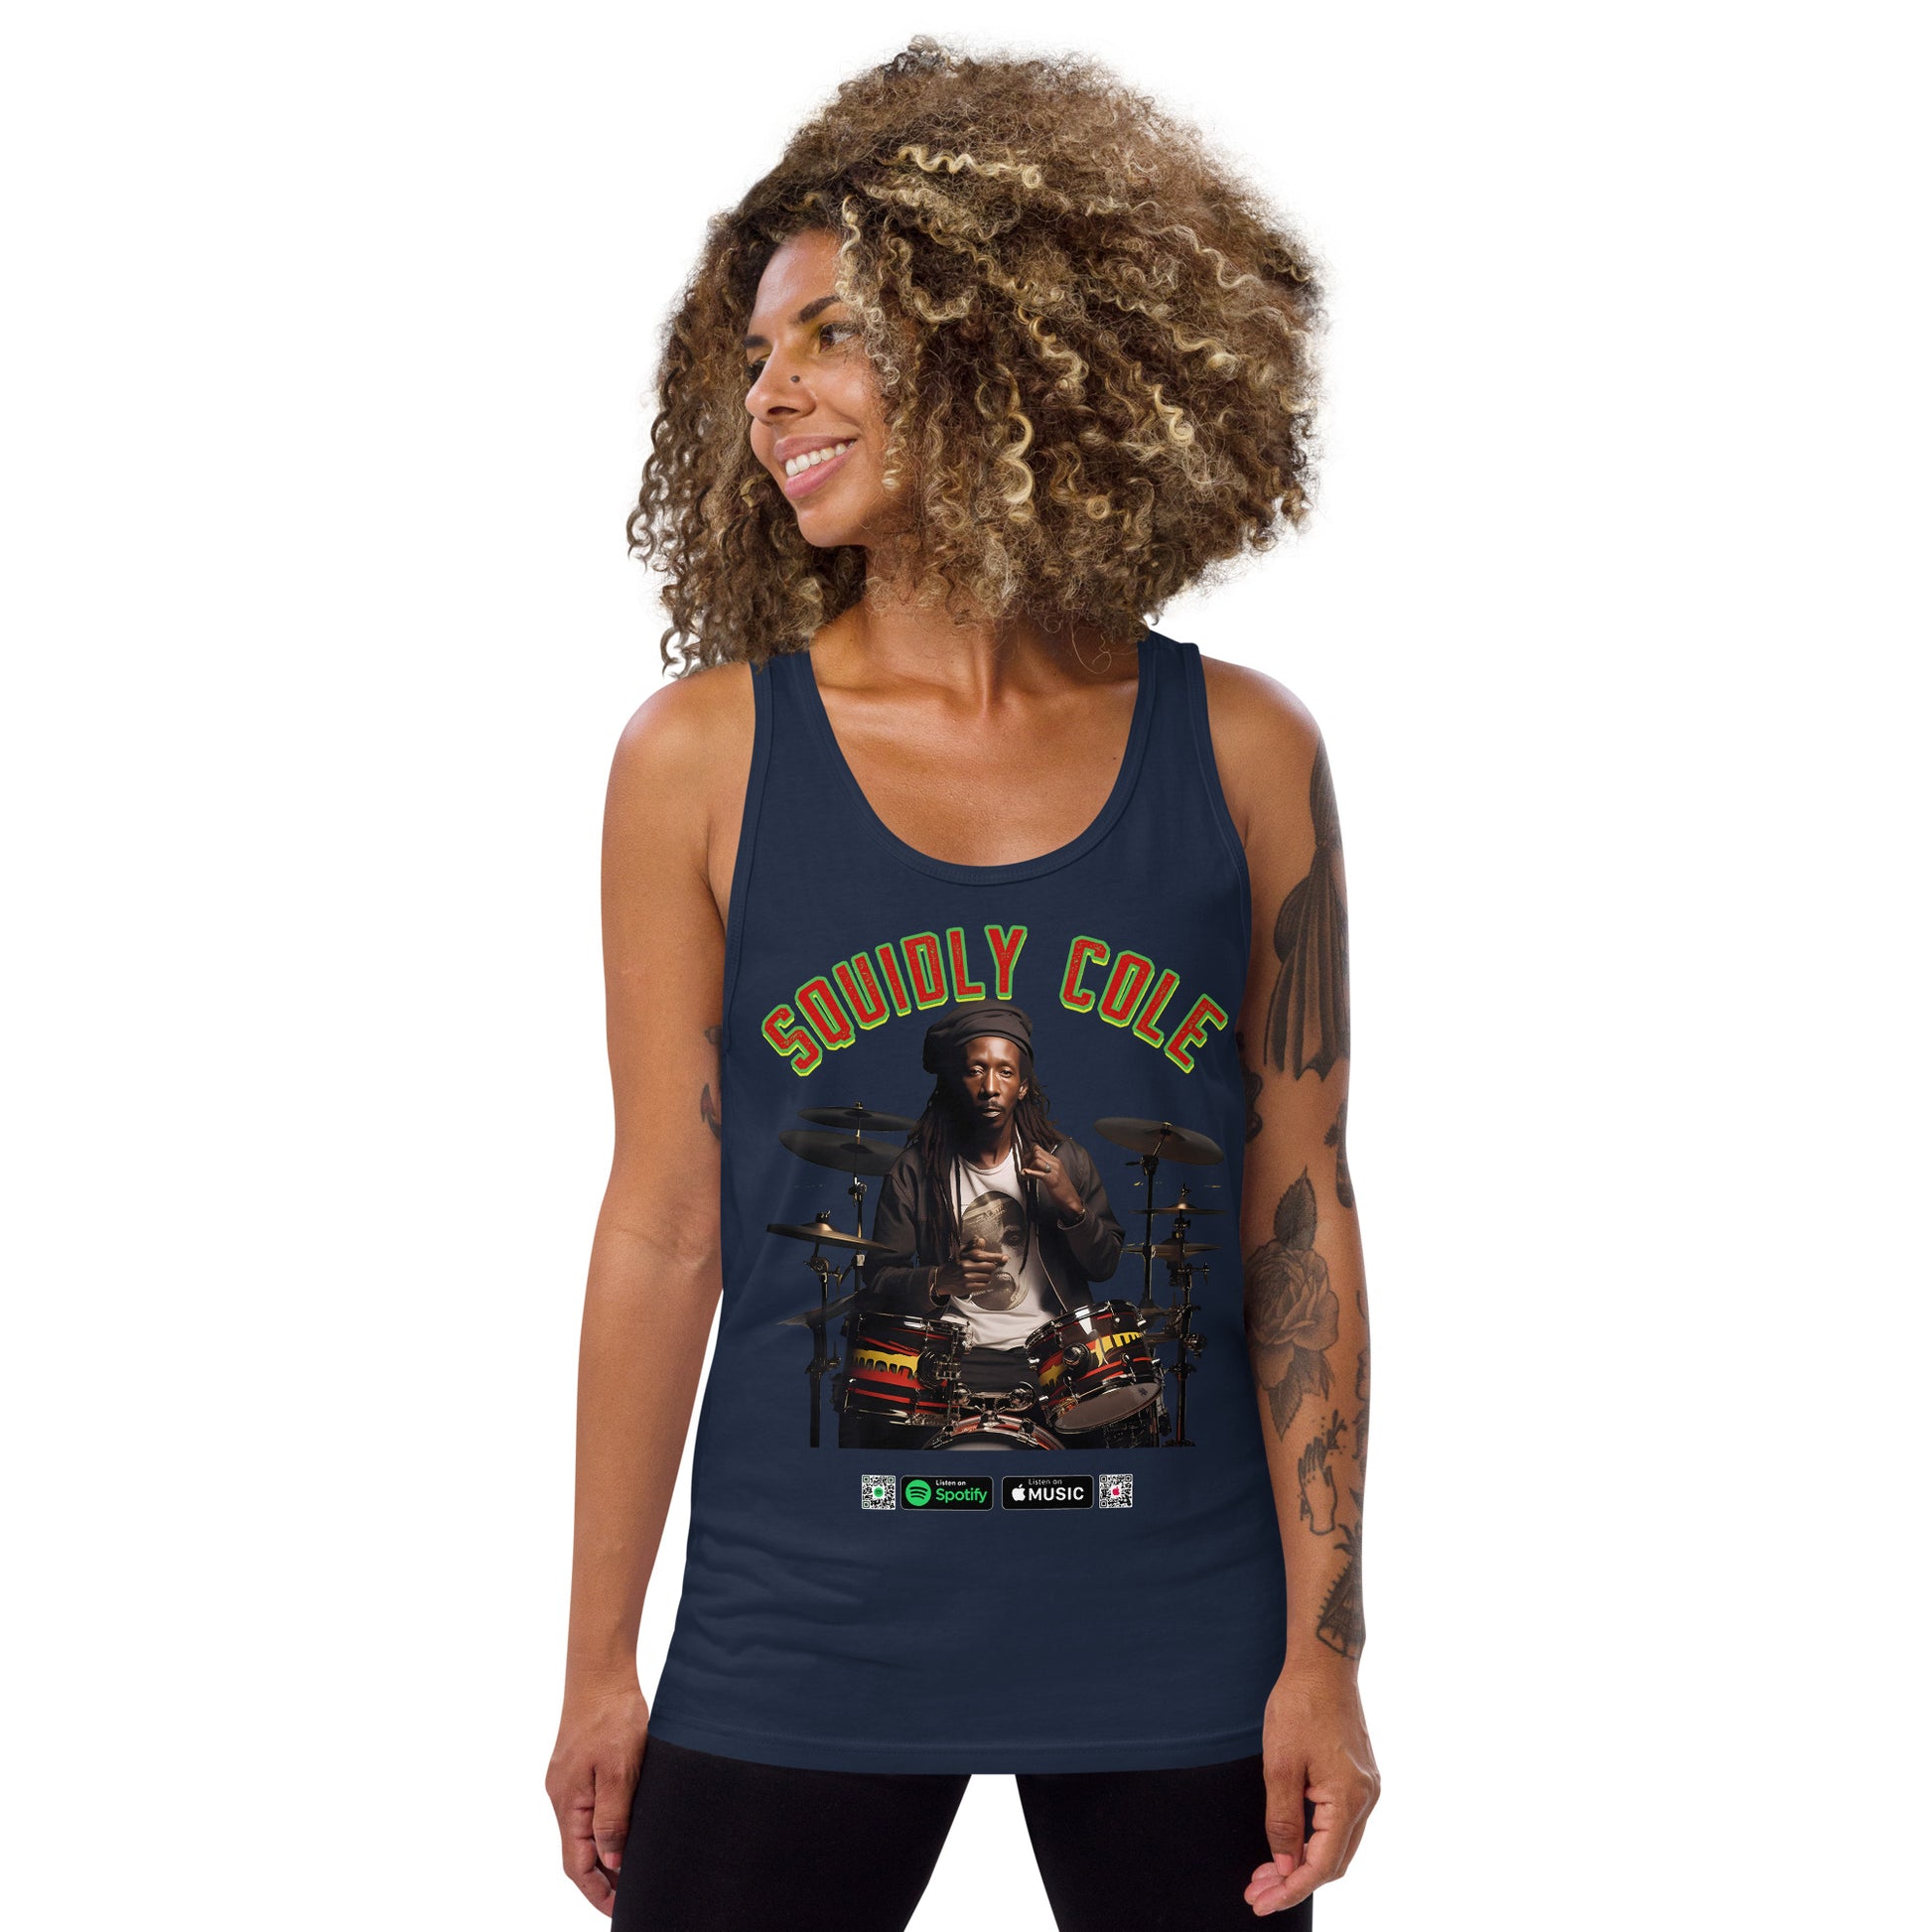 Feel the Rhythm: Dive into the Groove with our Reggae Drummer Squidly Cole Tank Top - Design #027. Express your musical spirit with this trendy tank. Perfect for sunny days and music lovers. #SquidlyColeGroove #ReggaeVibes #TankTopFashion